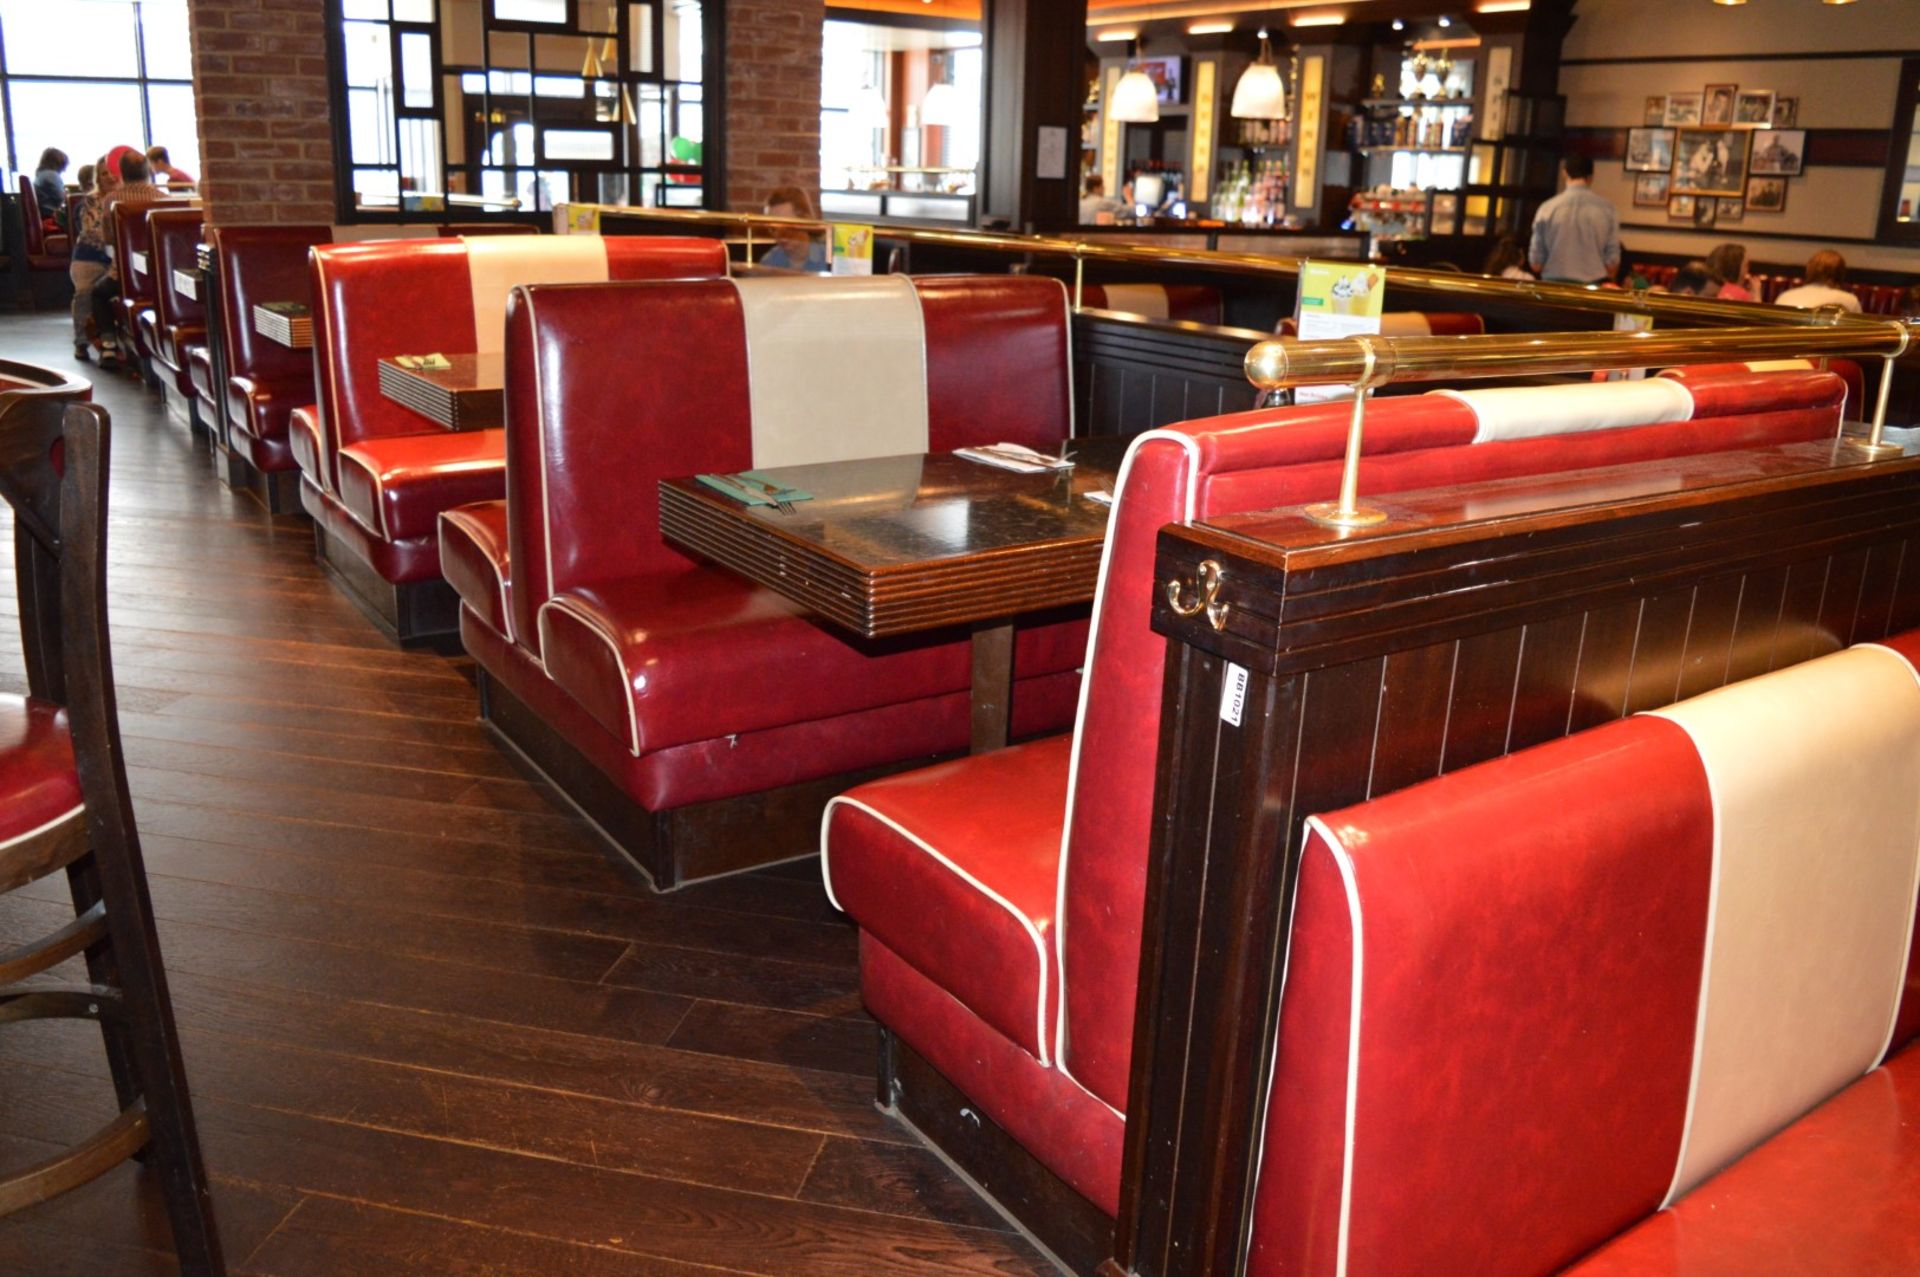 1 x Selection of Seating Booths in a 1950's Retro American Diner Design Supplied in Good Condition - - Image 2 of 7